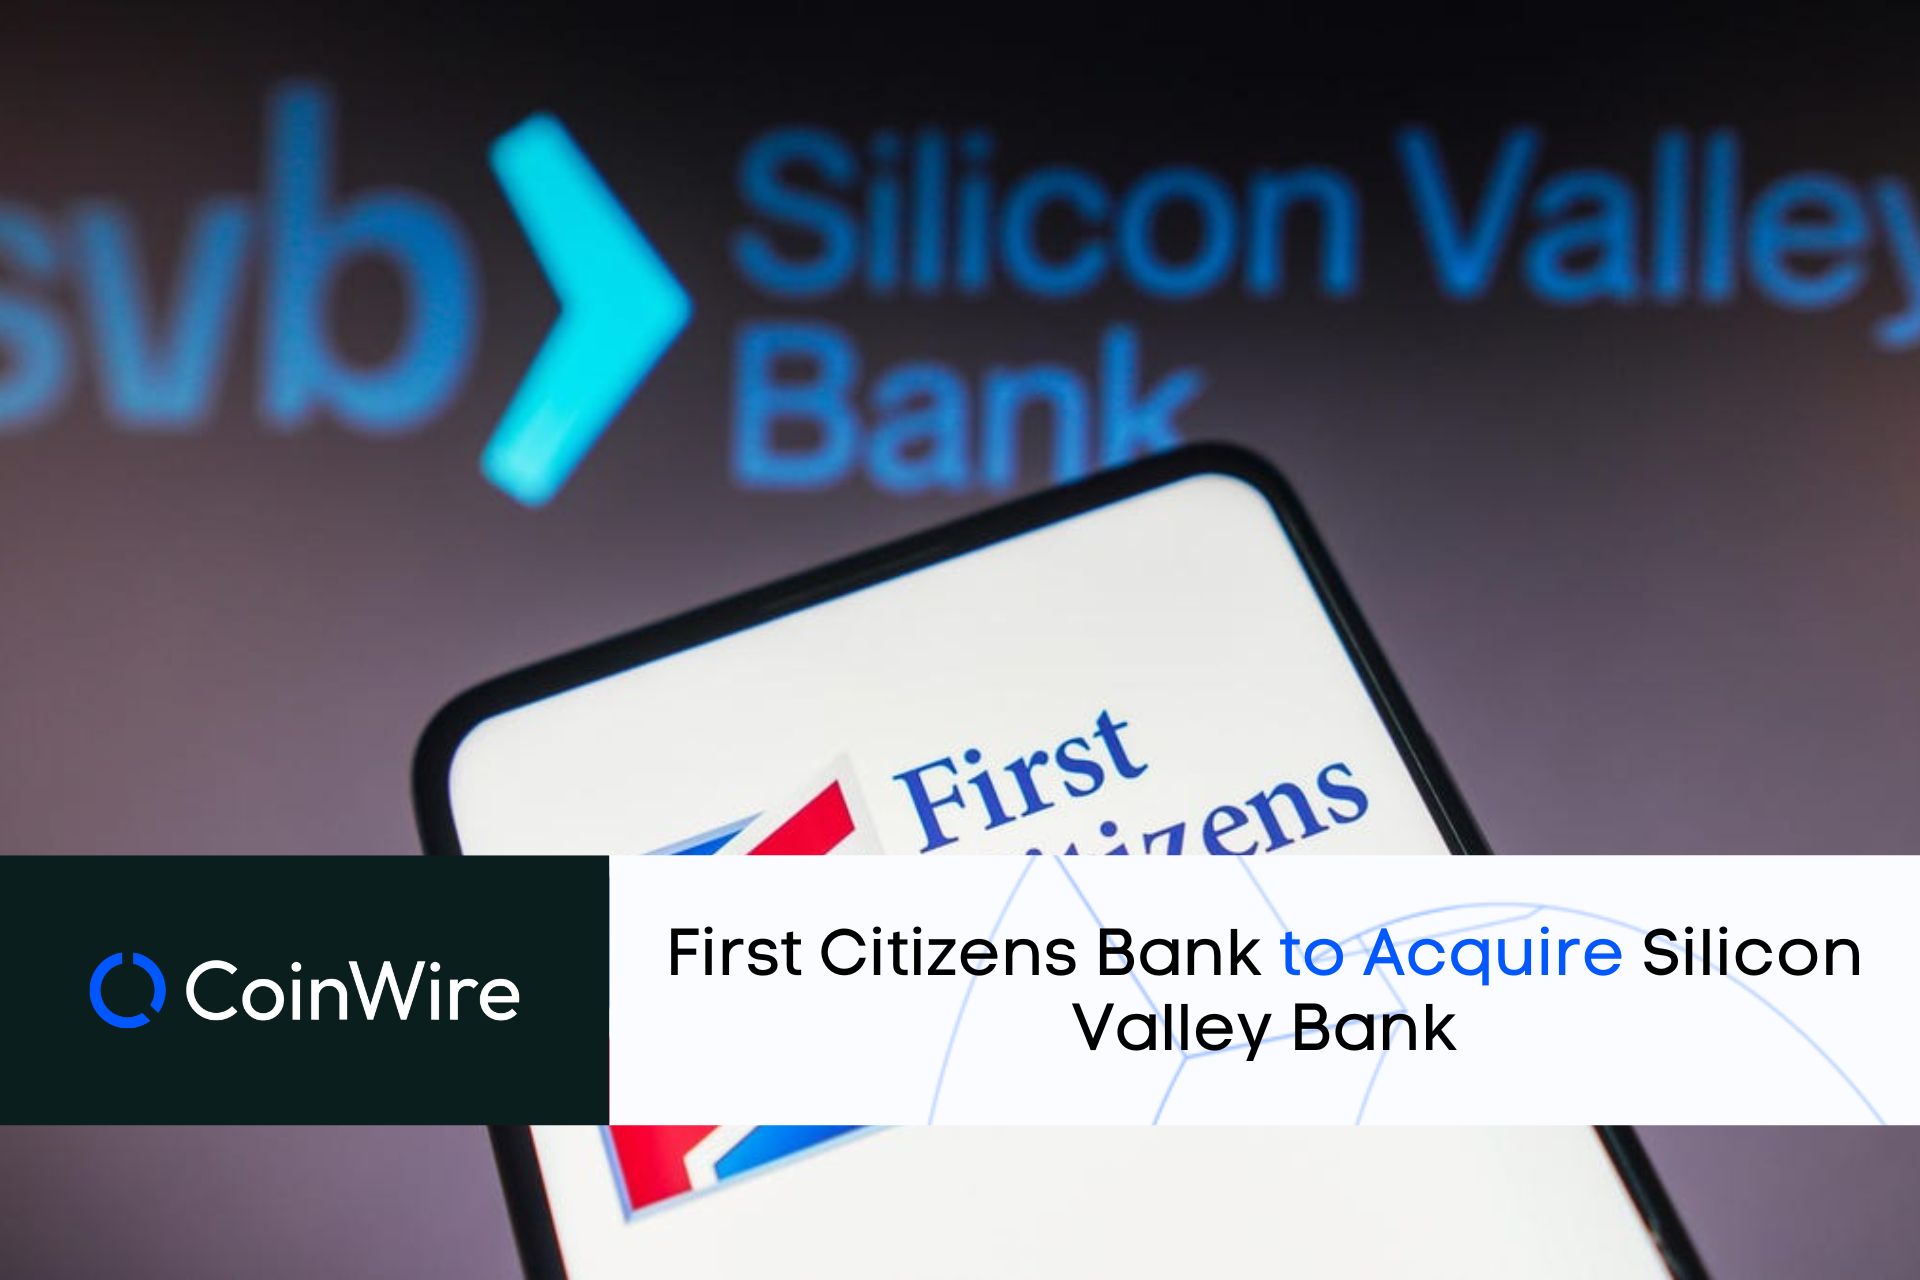 First Citizens Bank To Acquire Silicon Valley Bank